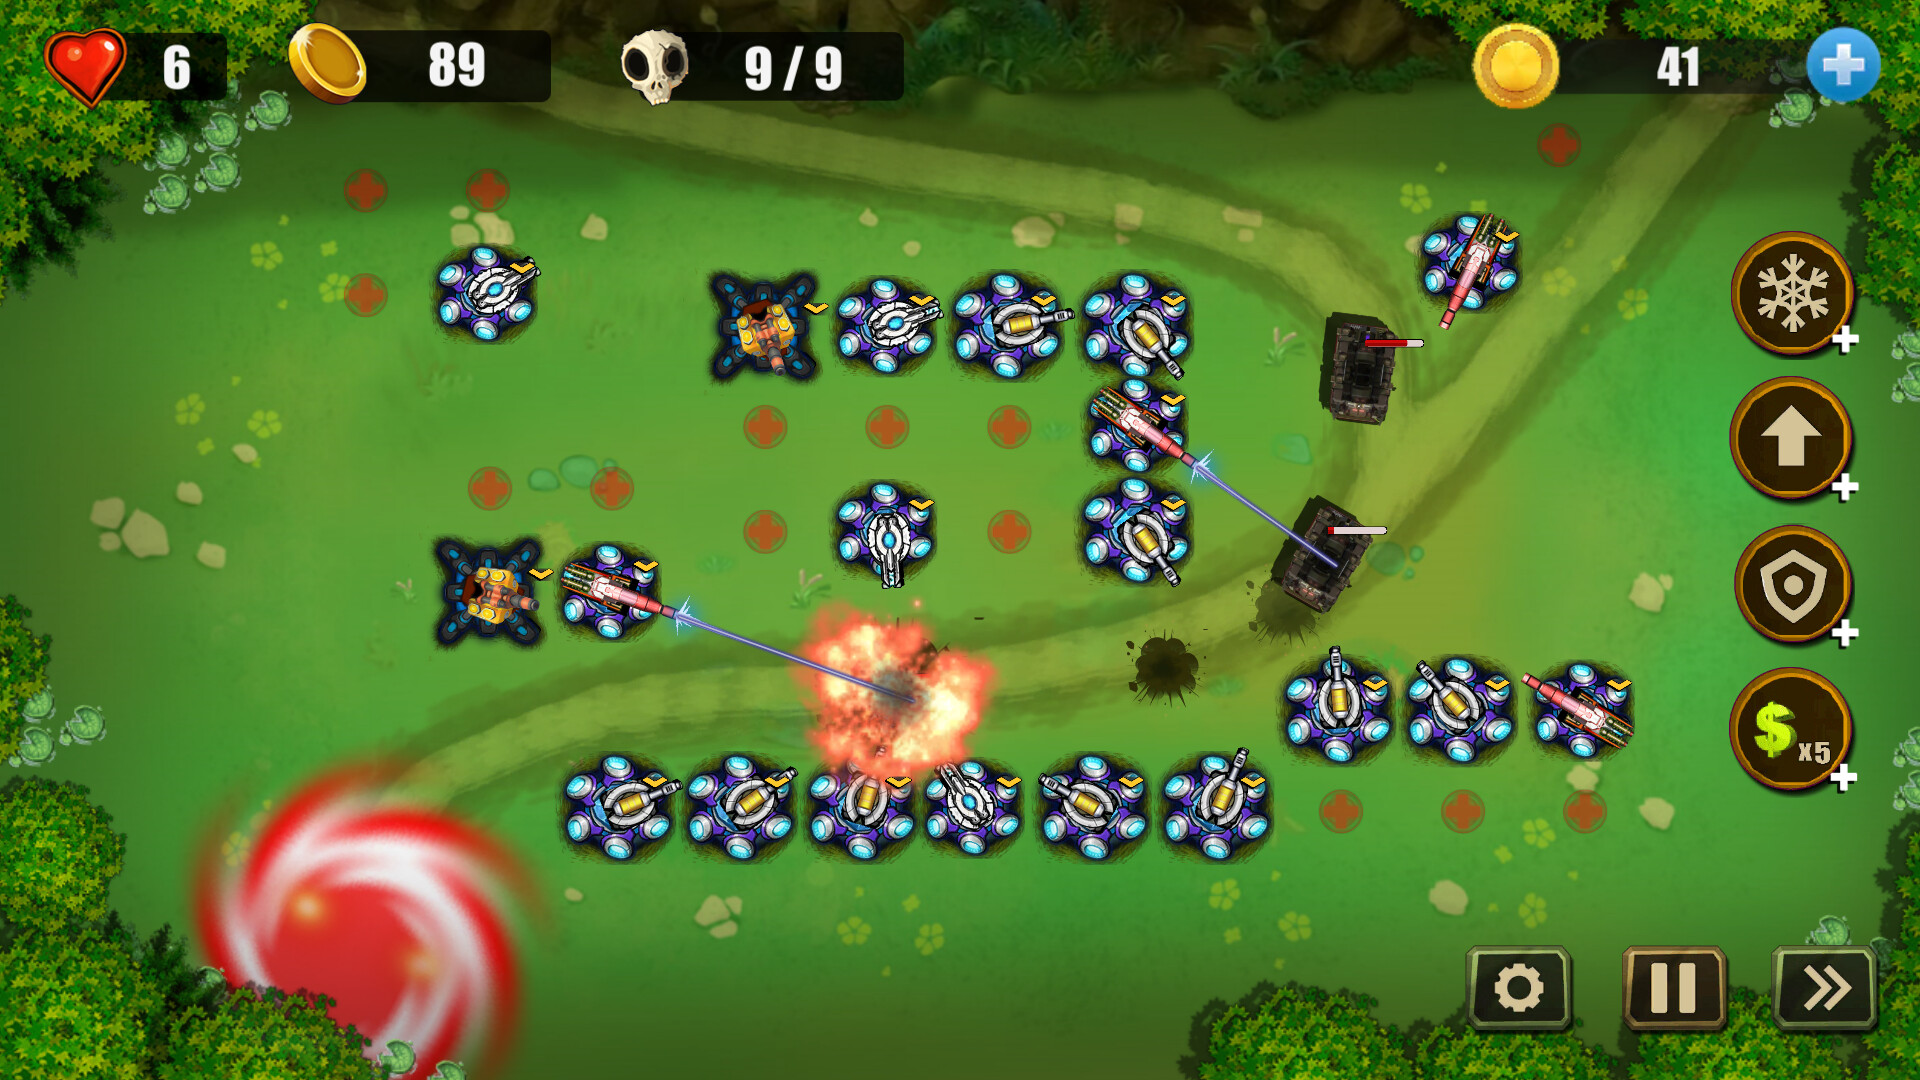 Ultimate Tower Defense on X:  / X